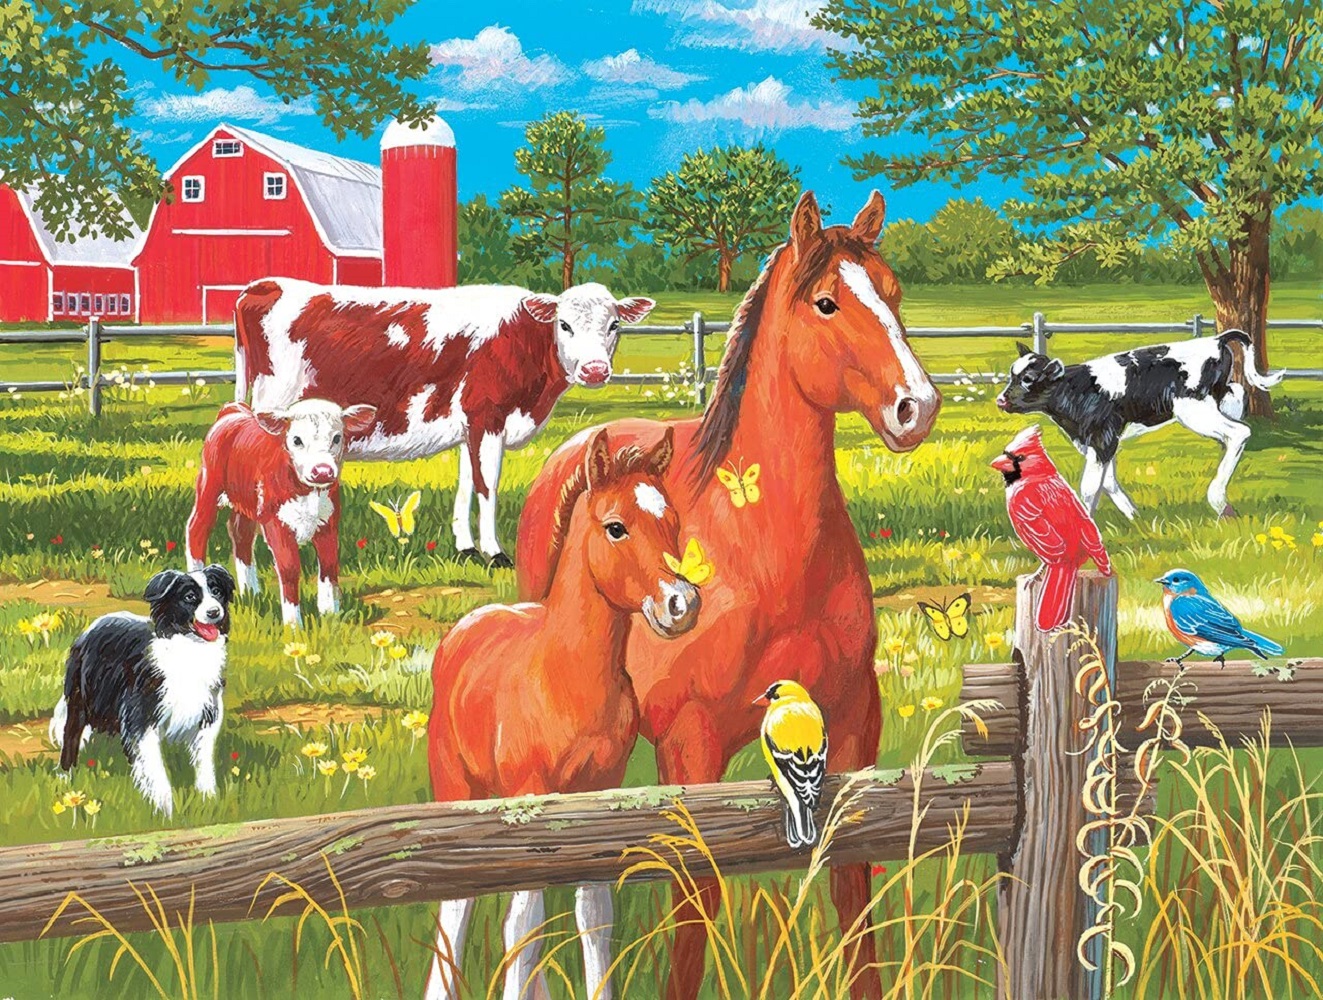 SUNSOUT INC - Spring Pasture - 300 pc Jigsaw Puzzle by Artist: William Vanderdasson - Finished Size 18" x 24" - MPN# 30450 - image 1 of 5